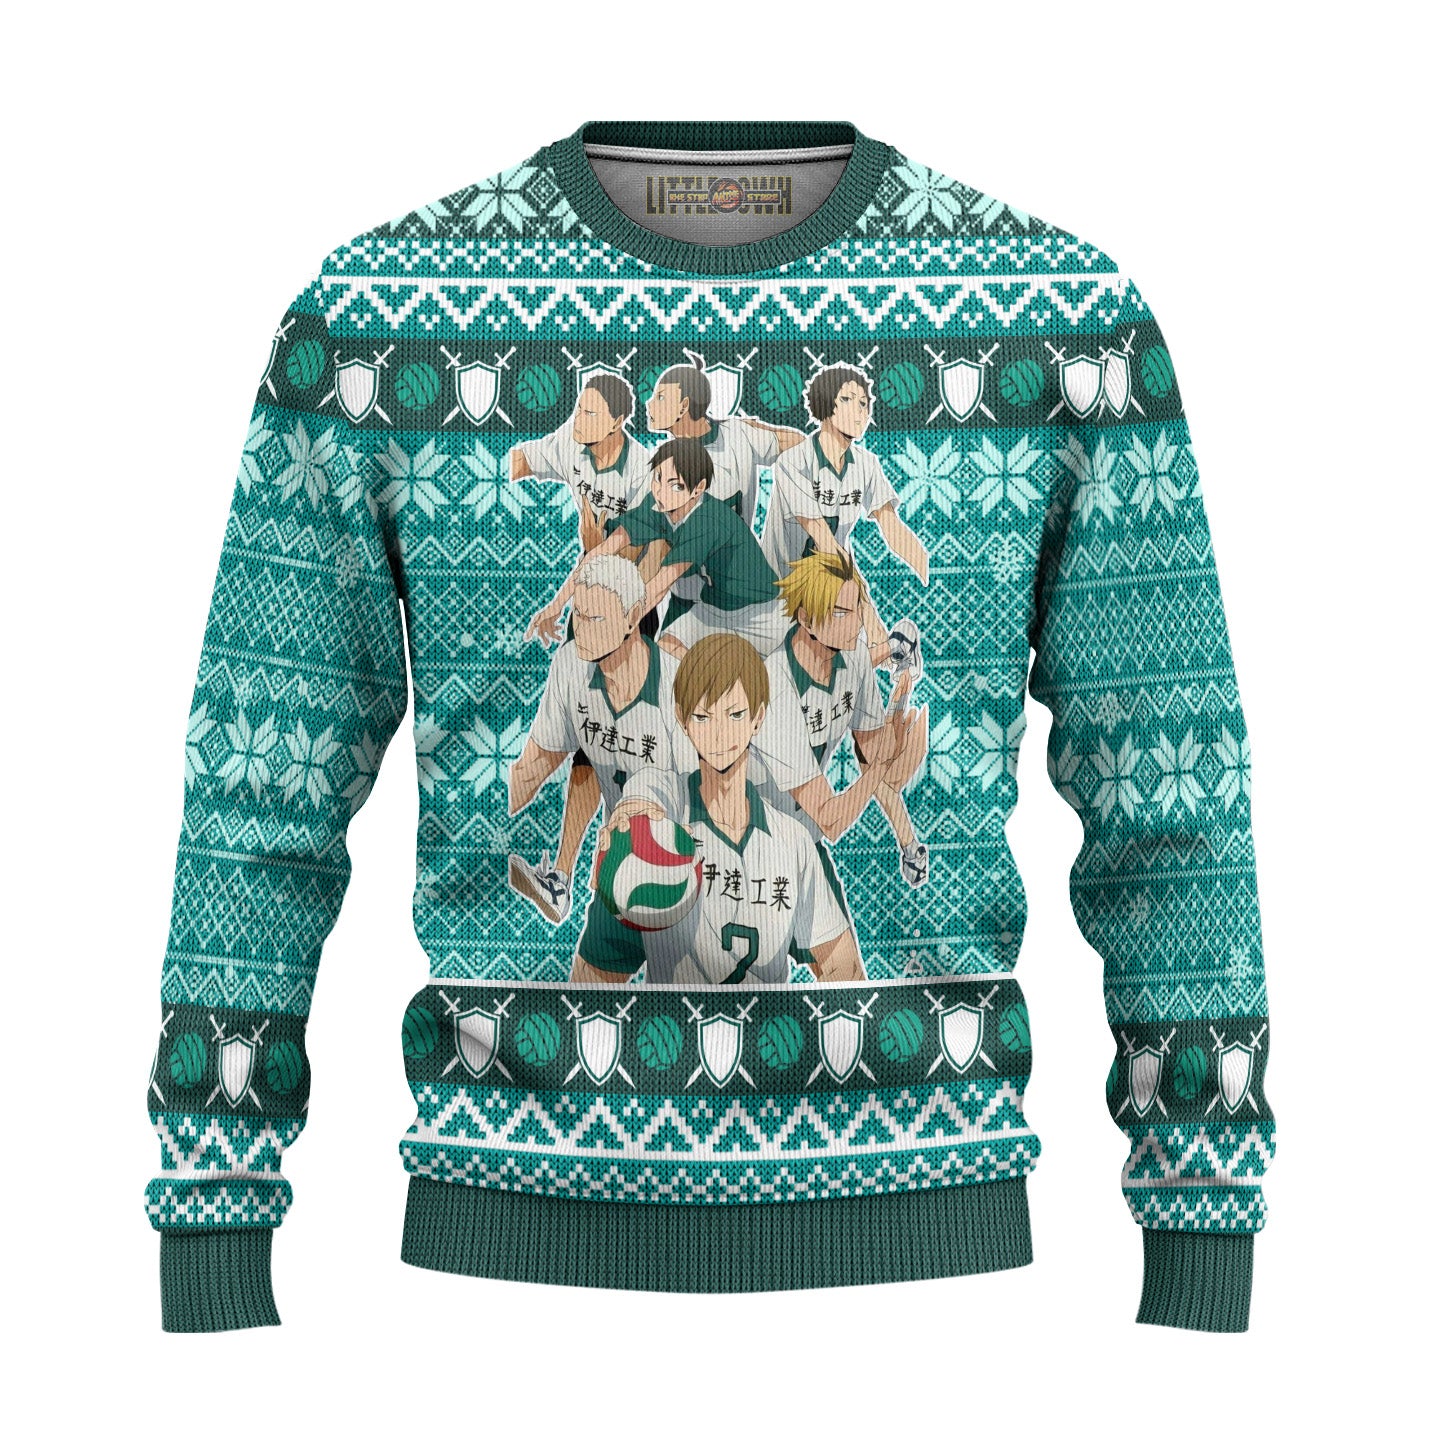 Date Tech High Ugly Christmas Sweater Haikyuu Anime Gift For Fans